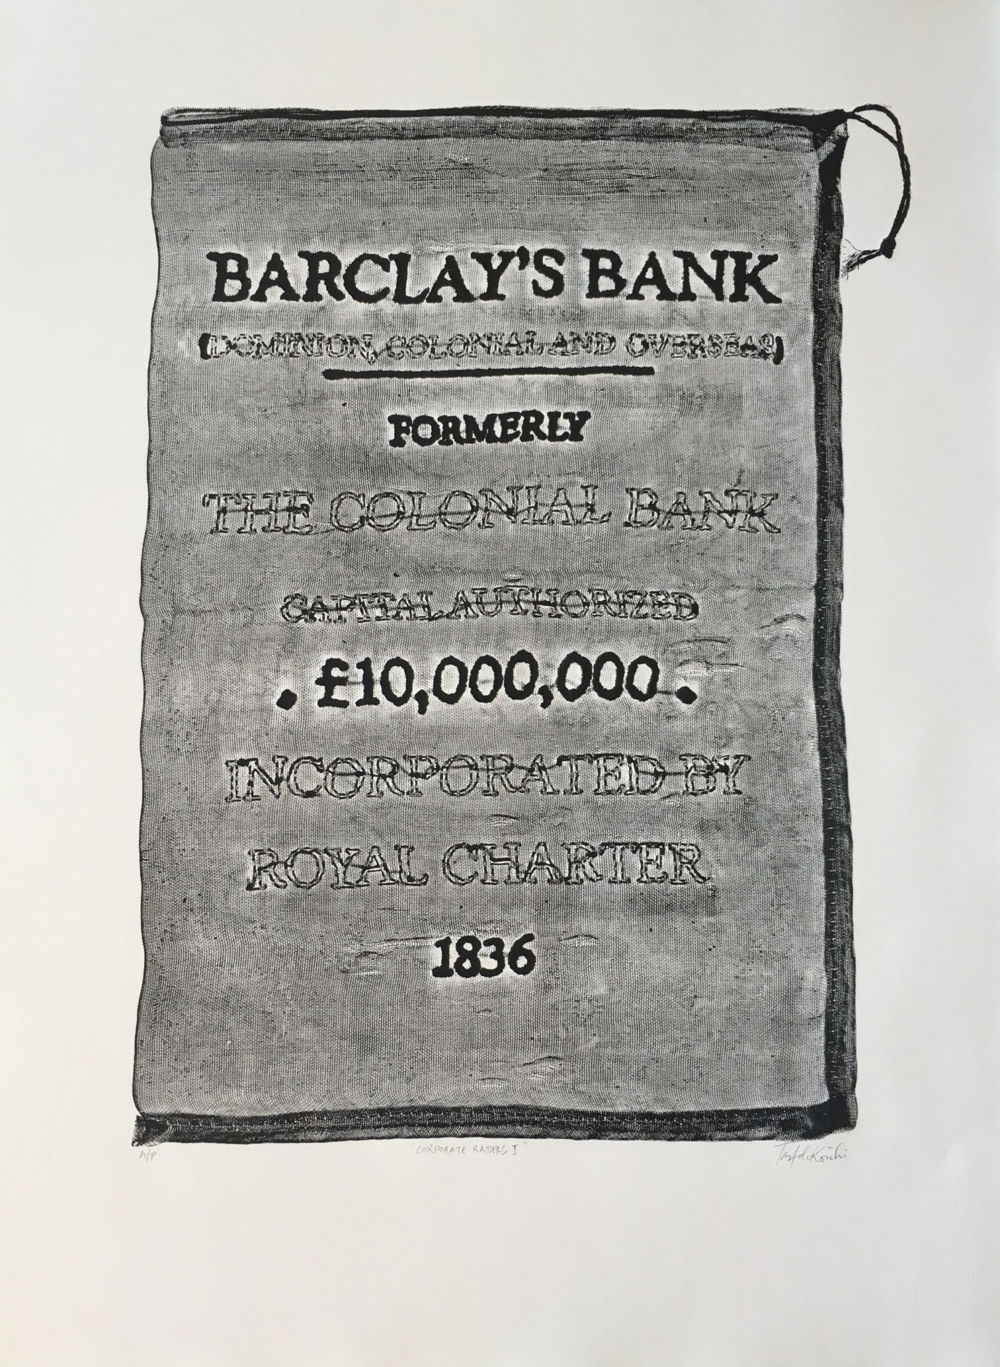 A black-and-white image of a cloth drawstring back with words embroidered on it. The text reads "Barclay's Bank, (Dominion, colonial, and overseas), Formerly the Colonial Bank, Capital authorized 10,000,000 pounds, incorporated by royal charter 1836." Most of the text is just an outline and has a line striking through, however certain words are emphasized and unbroken including "Barclay's Bank, formerly, 10,000,000 pounds, and 1836."